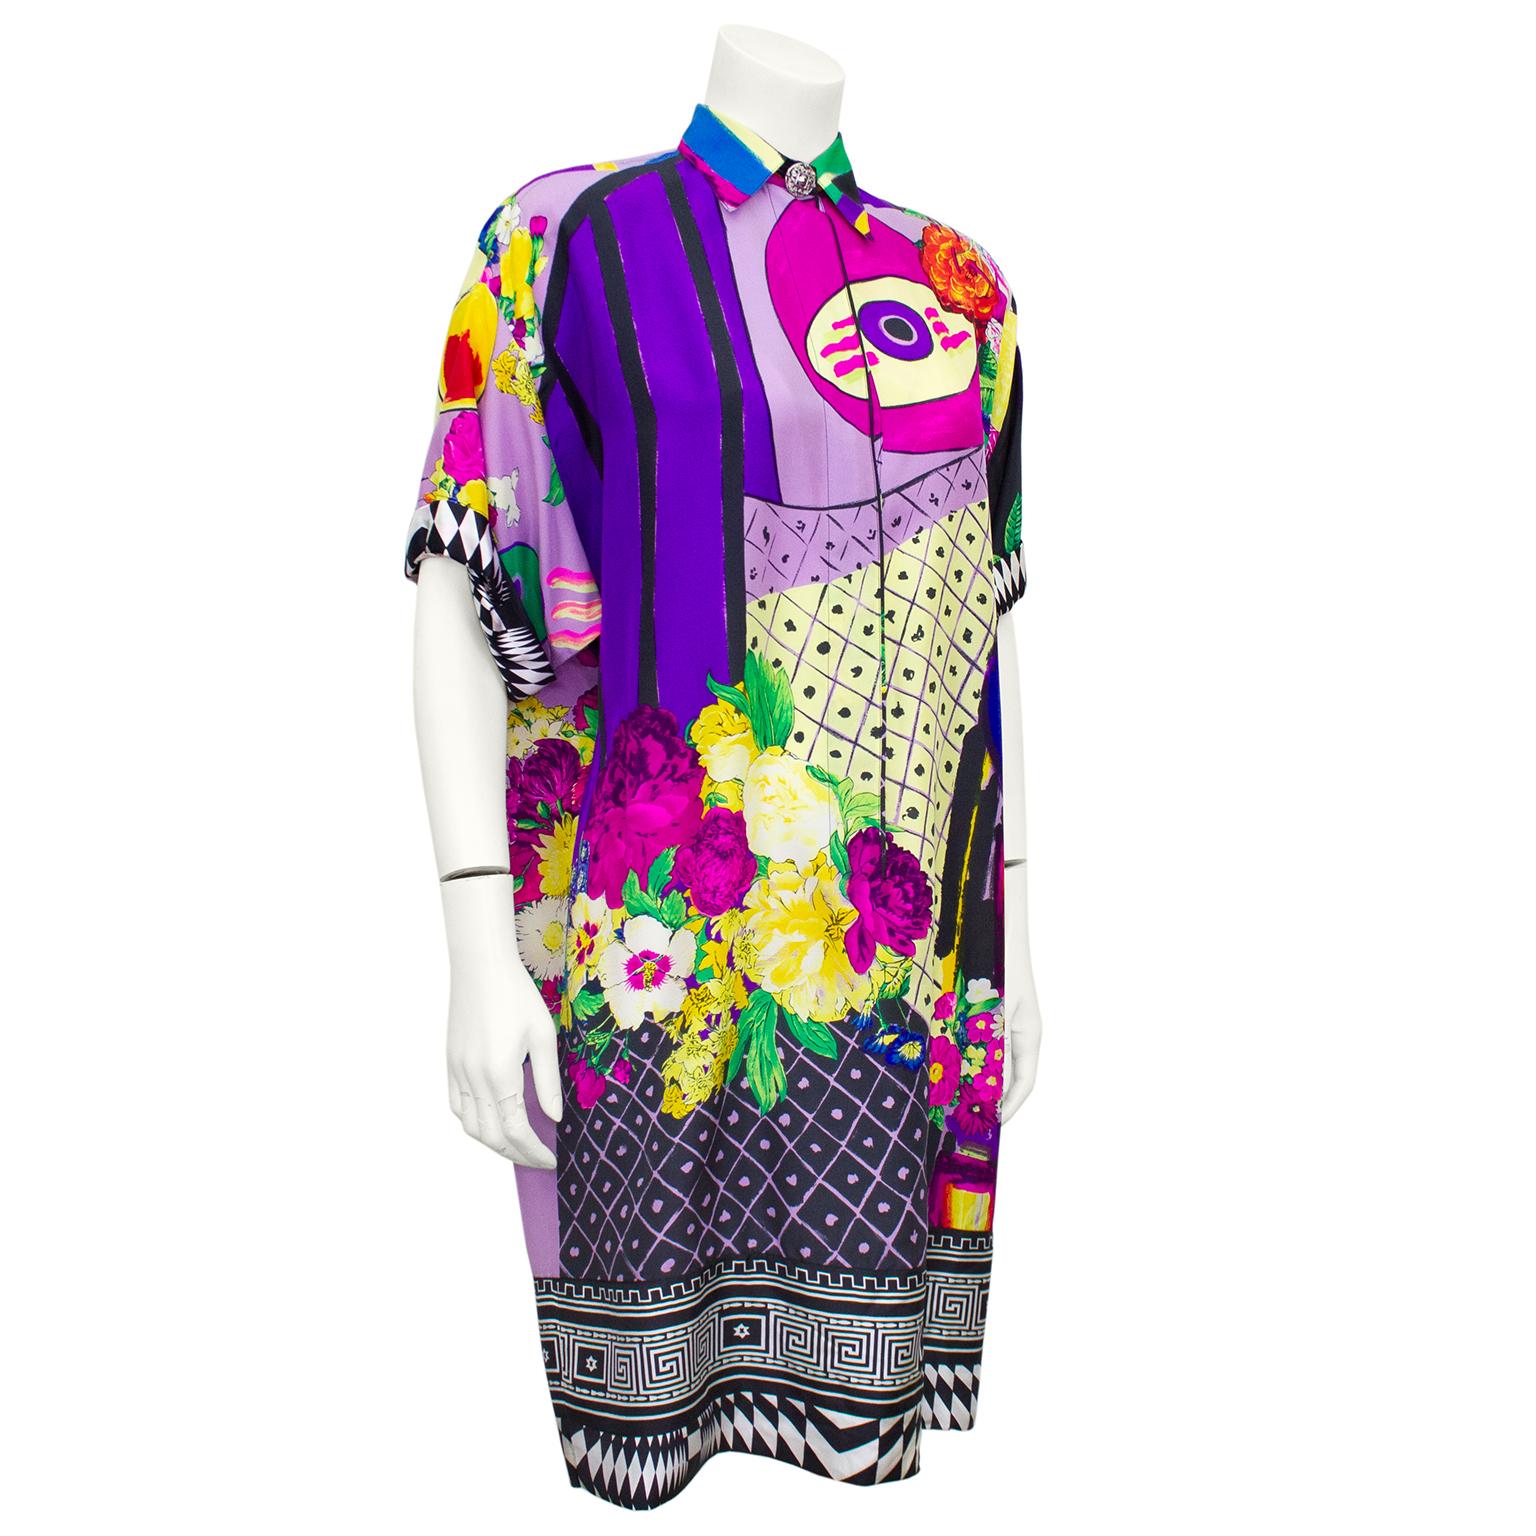 1990s Gianni Versace Couture silk shirt dress. Iconic Gianni Versace with it's mix of colours, prints and patterns. Front features a mix of purple, pink, black, white and yellow with abstract paint brush strokes and flowers. Hem features a mix of